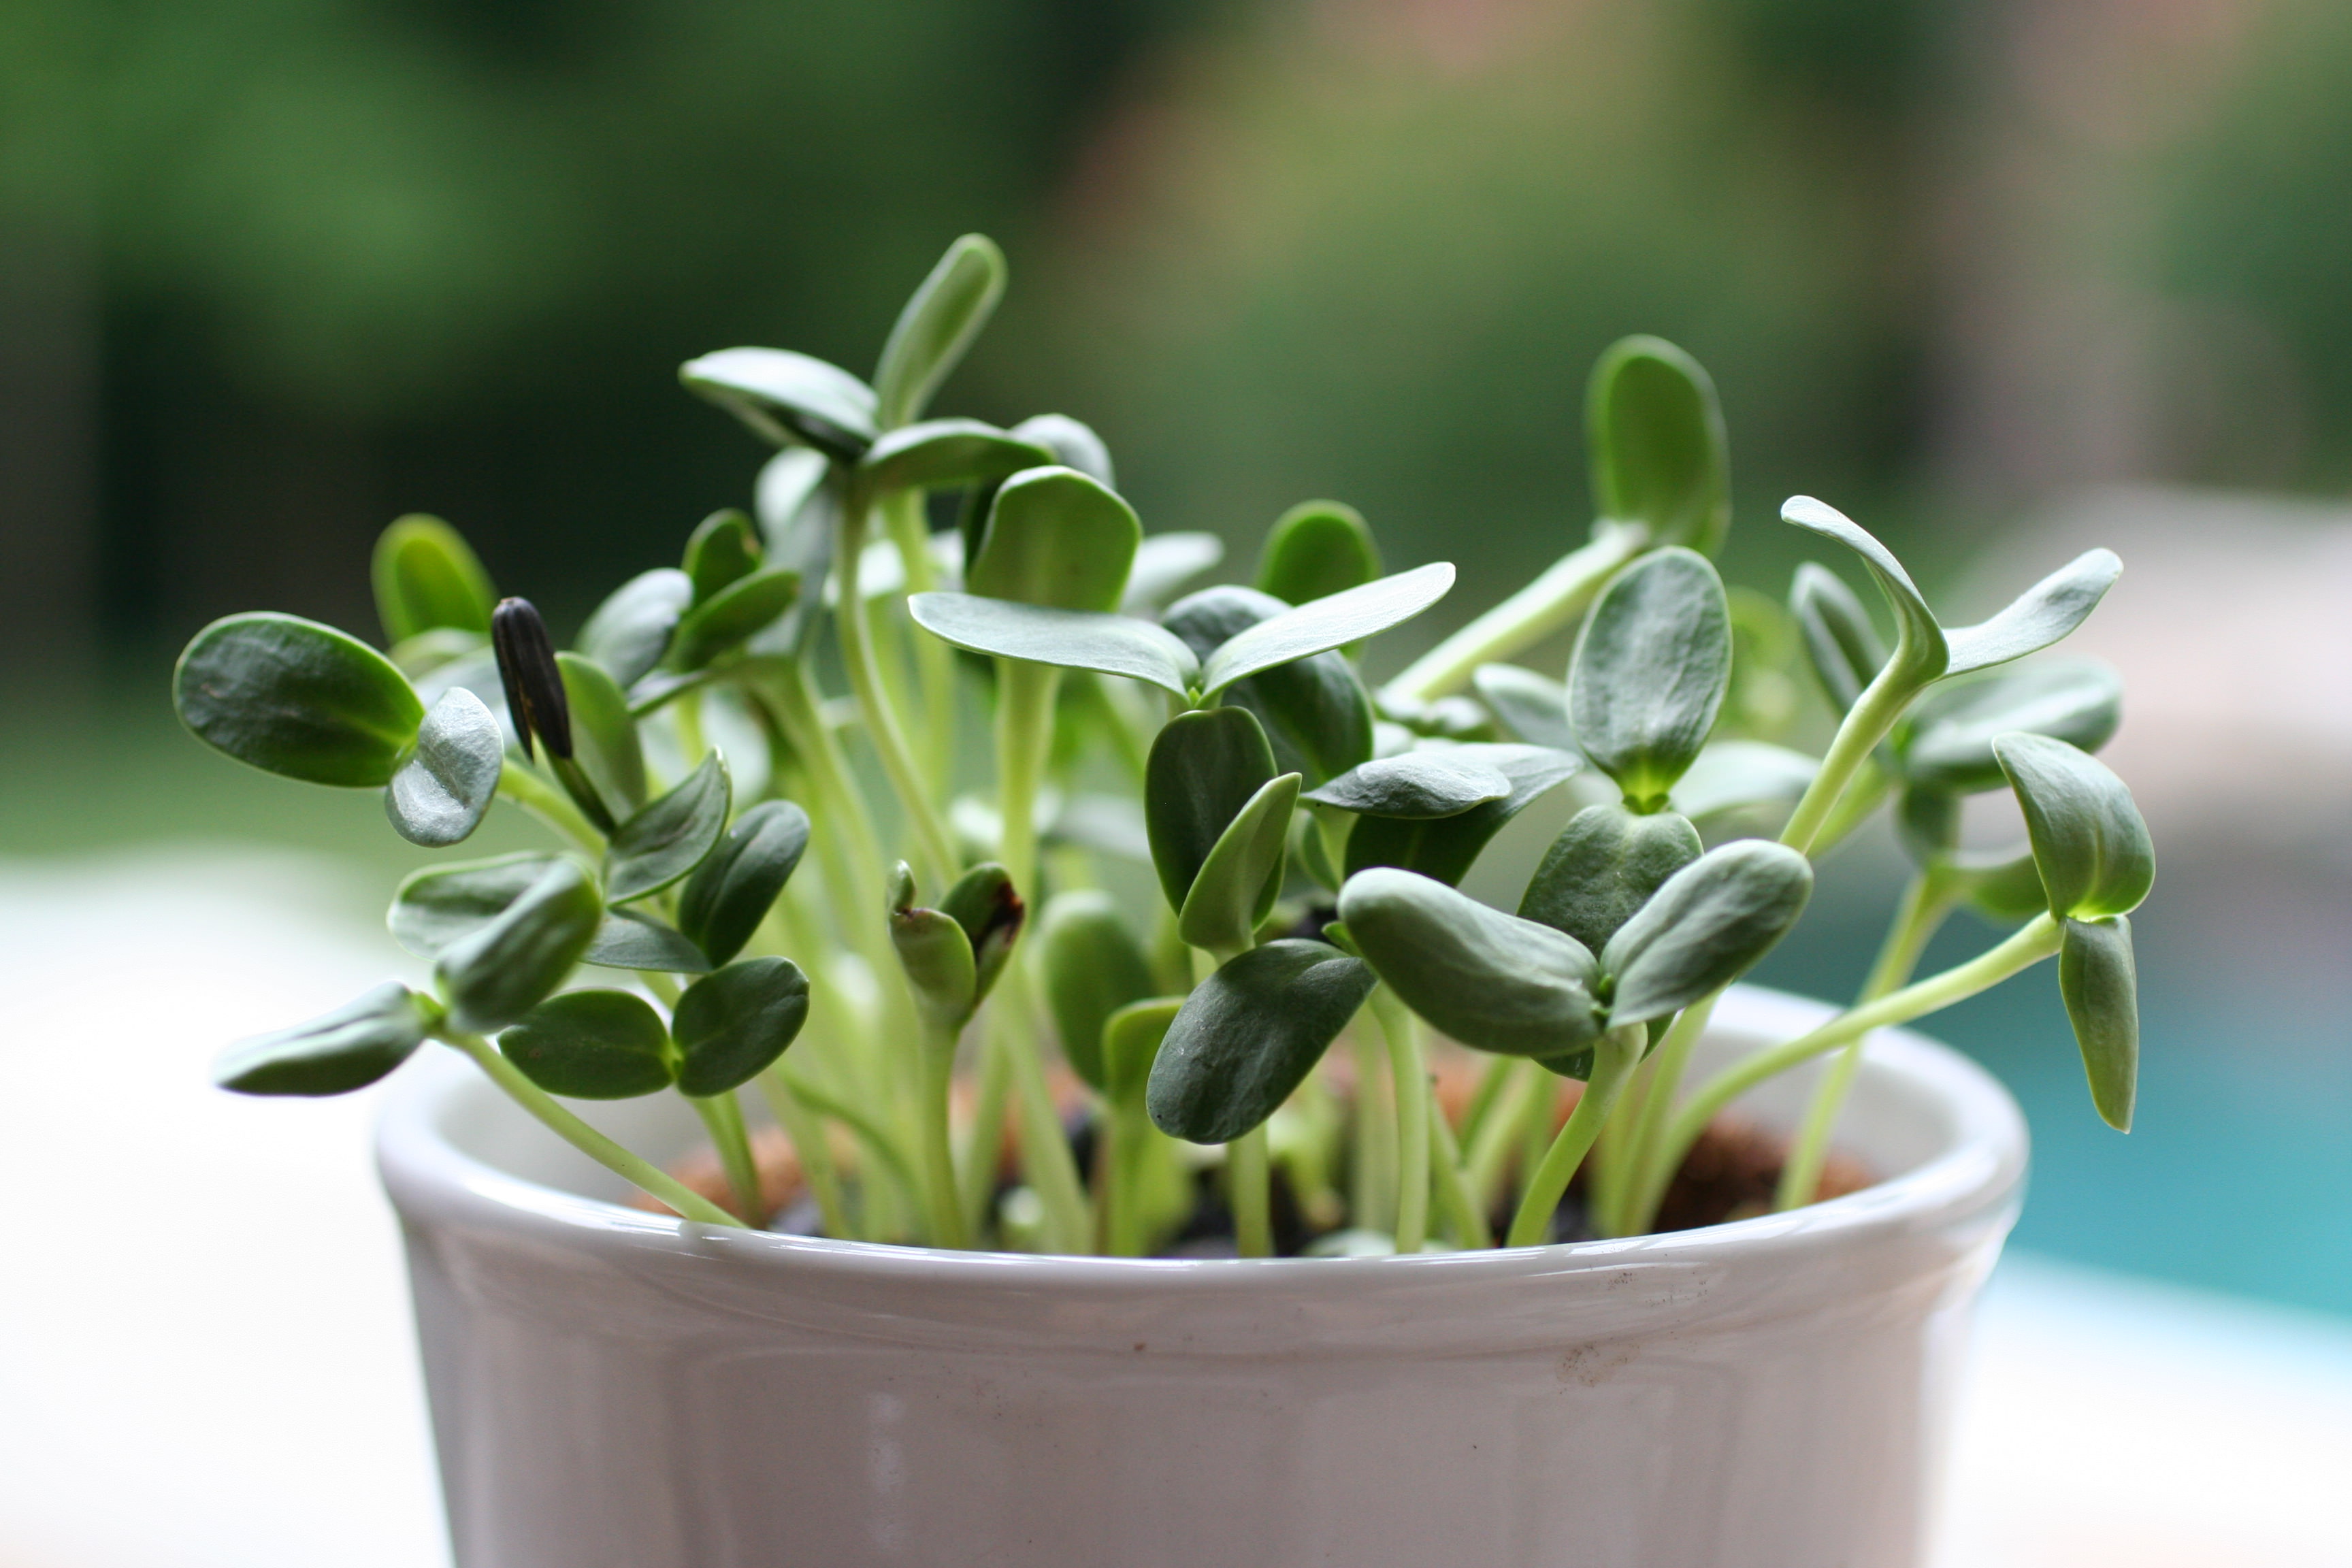 Sunflower Sprouts for an Empowered Life